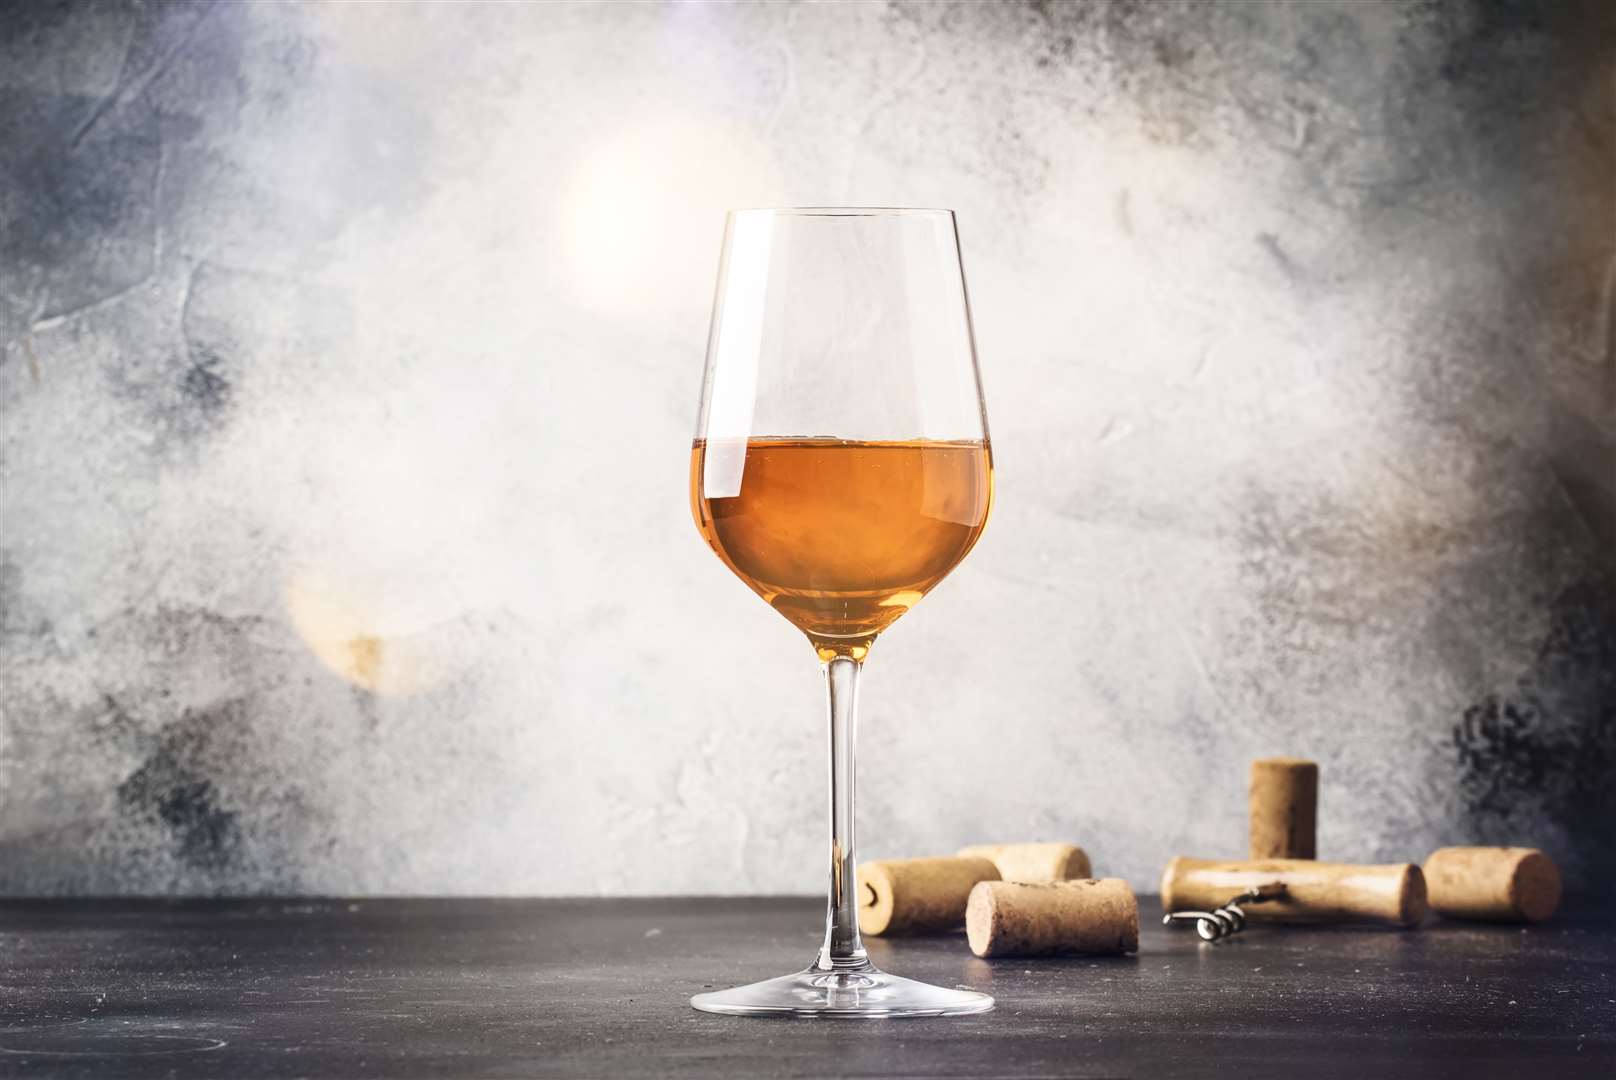 Orange wine is fermented white wine made from grapes with their skins left on.